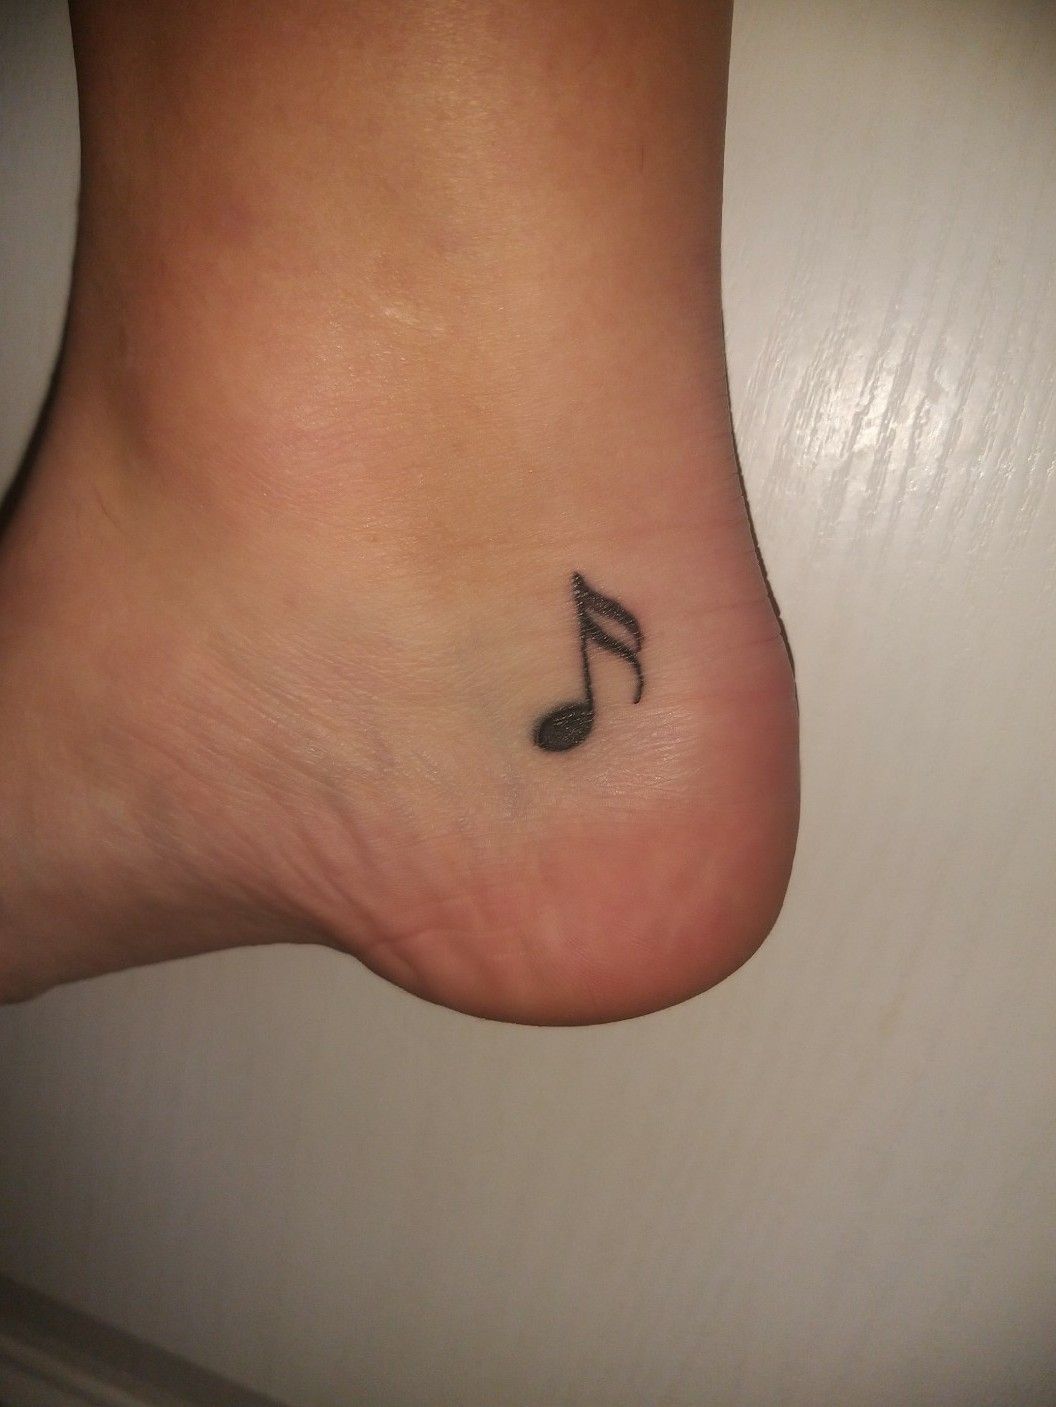 Music helps the story go on tattoo semicolon music  Music tattoos Music  tattoo designs Bandaid tattoo